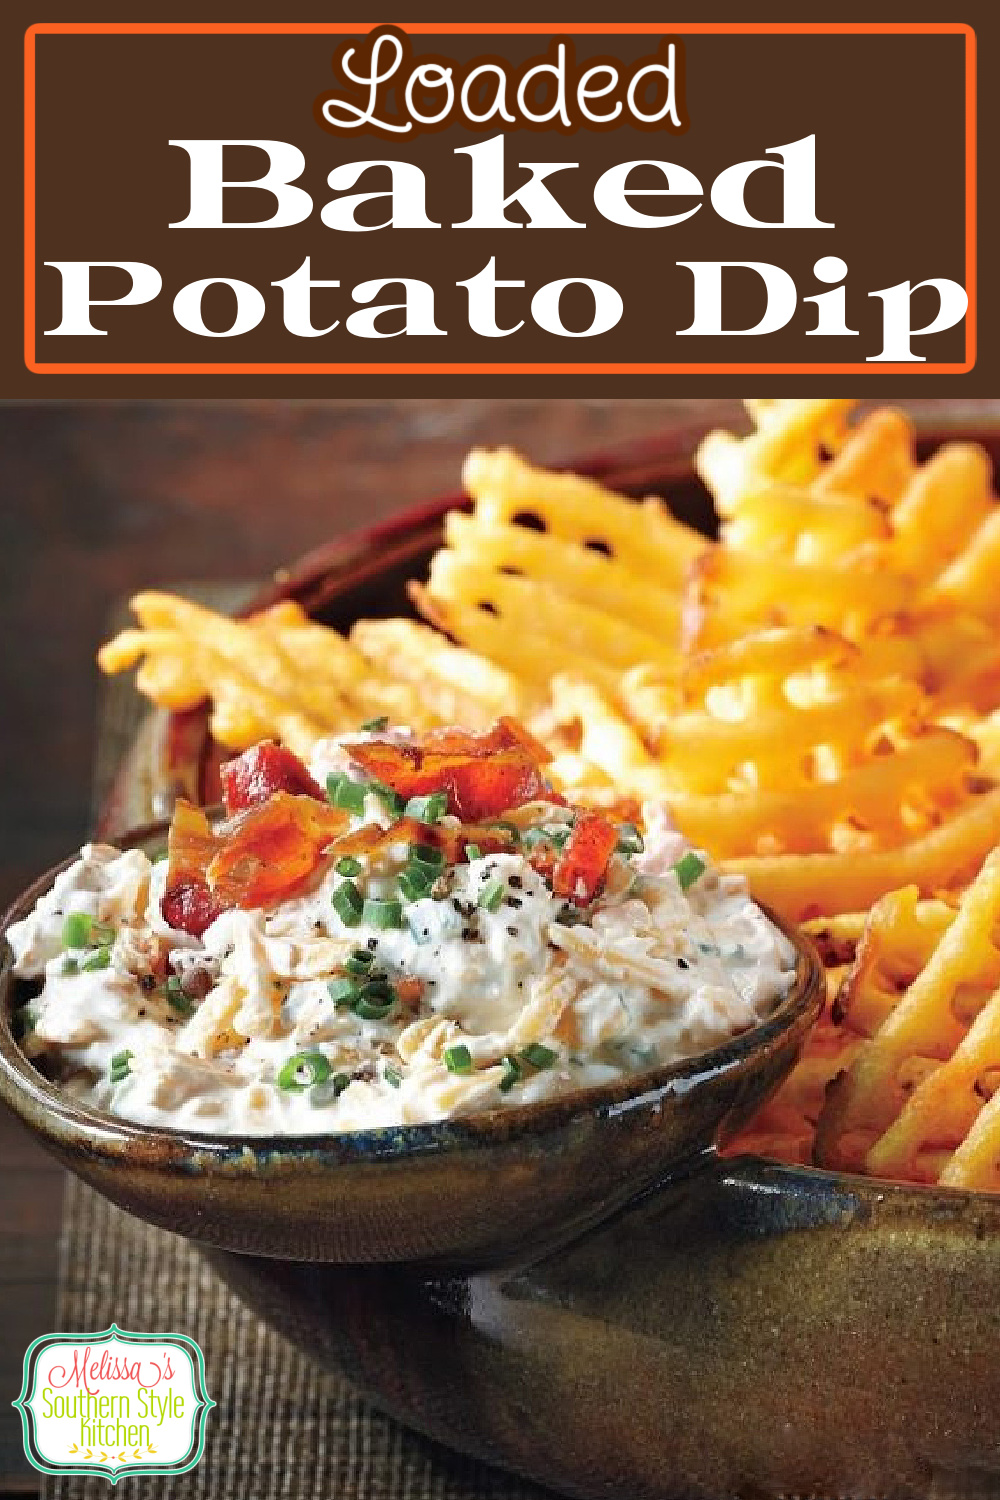 Serve this Loaded Baked Potato Dip with waffle fries baked extra crispy for dipping #loadedbakedpotatodip #bakedpotatoes #potatorecipes #potatodip #appetizers #holidayappetizerrecipes #southernrecipes via @melissasssk